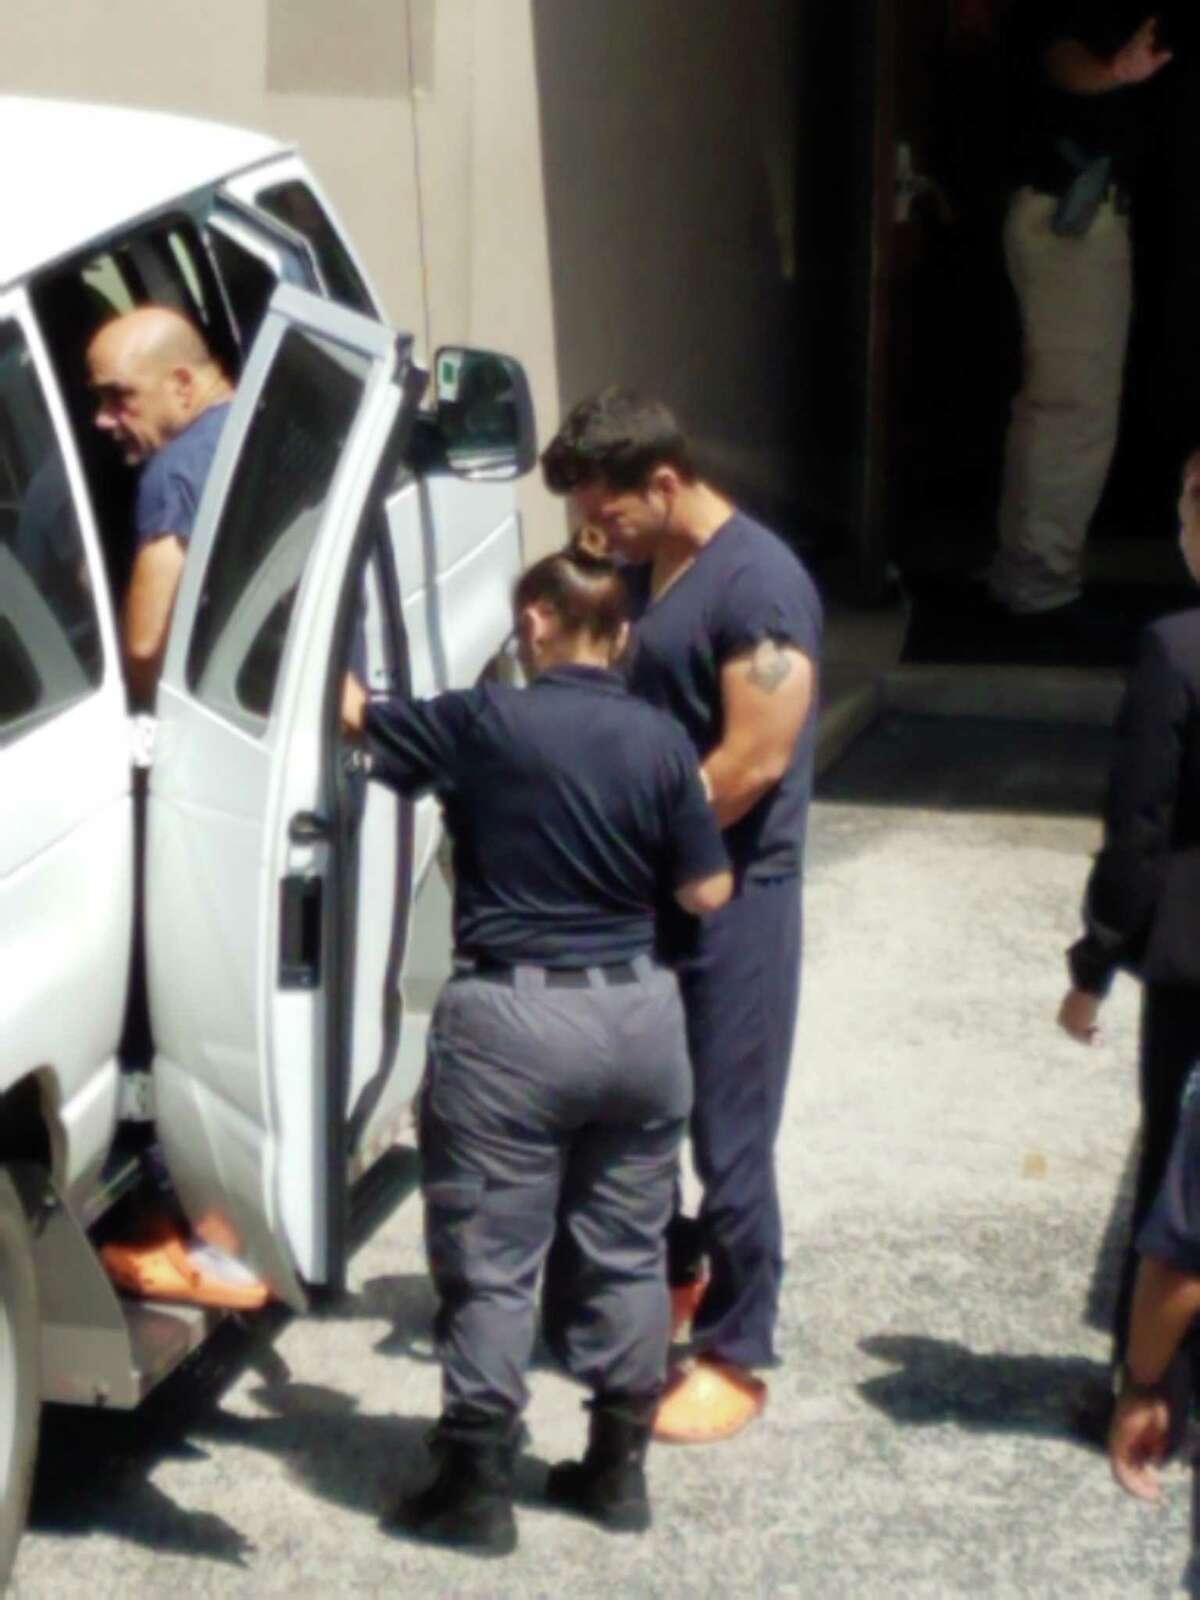 Marino Maury Diaz-Leon, 52, gets into a vehicle to be taken back to jail after a hearing in federal court in San Antonio on Monday, July 8, 2019. Behind him is co-defendant  Fernando Guardado Vazquez, 40. The two men are accused of bribing a state employee to sidestep rules requiring trucking safety tests before a commercial driver's license is issued.